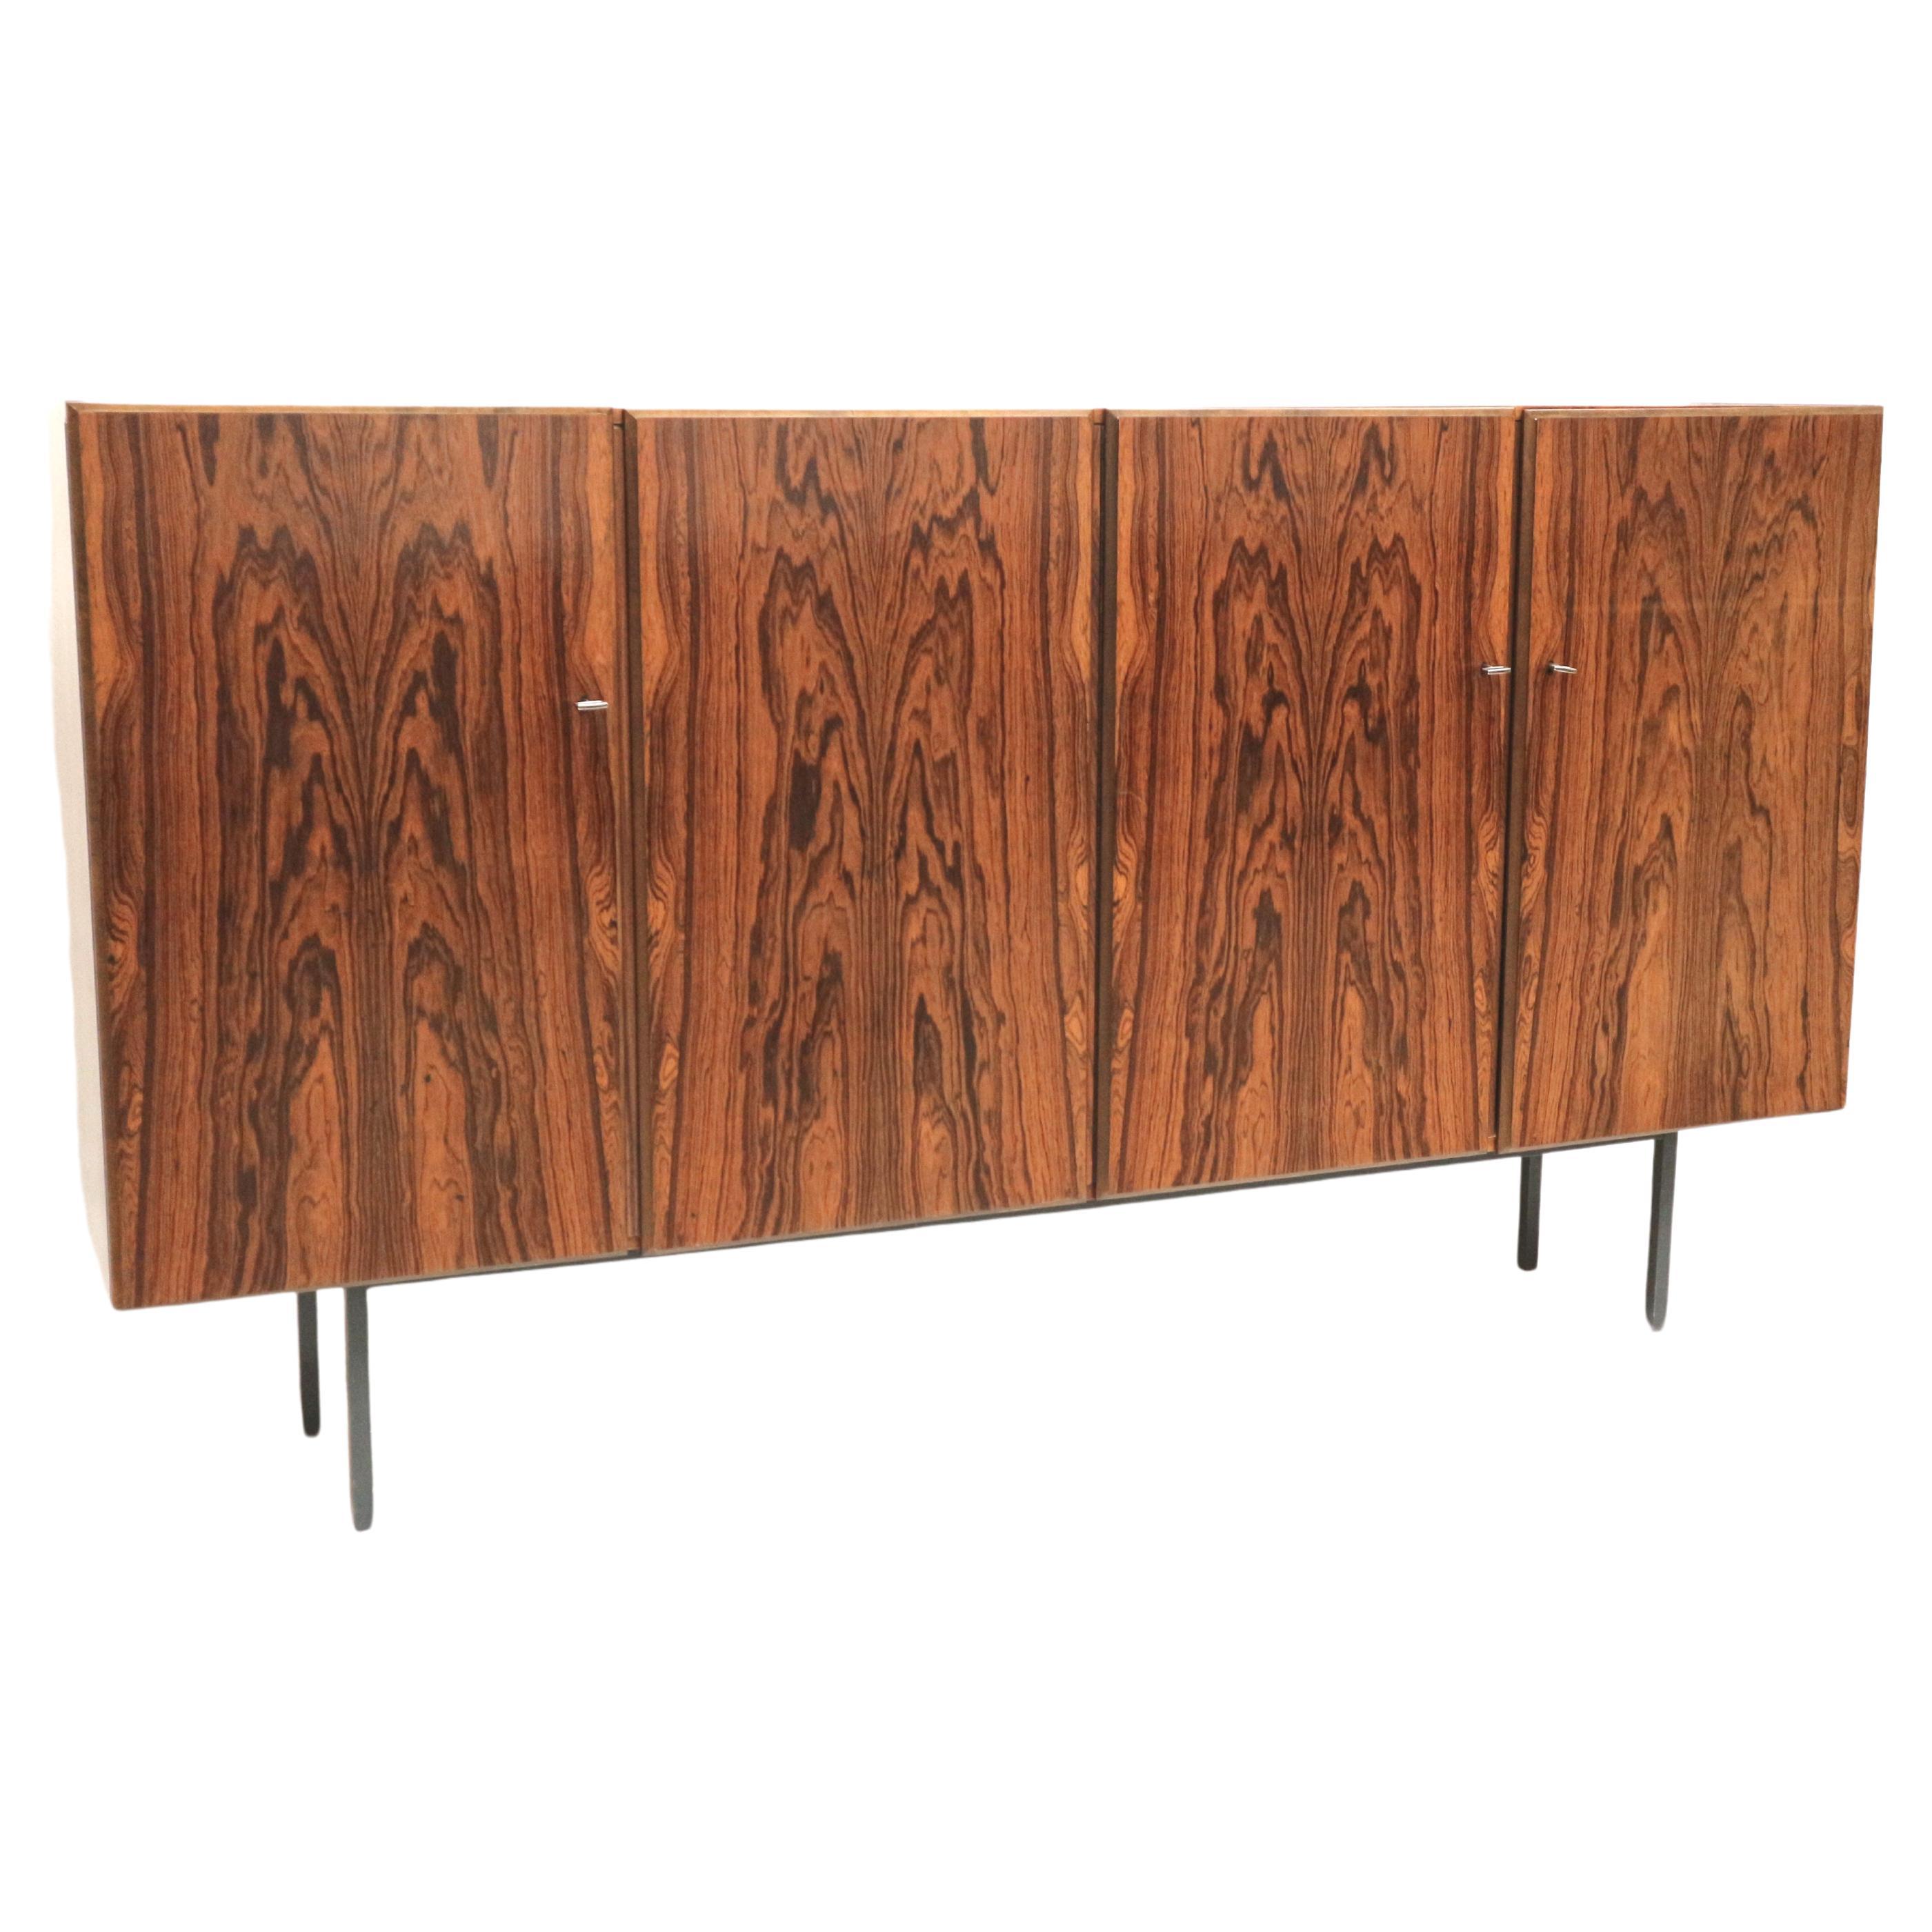 Large vintage rosewood sideboard / highboard made in the 60